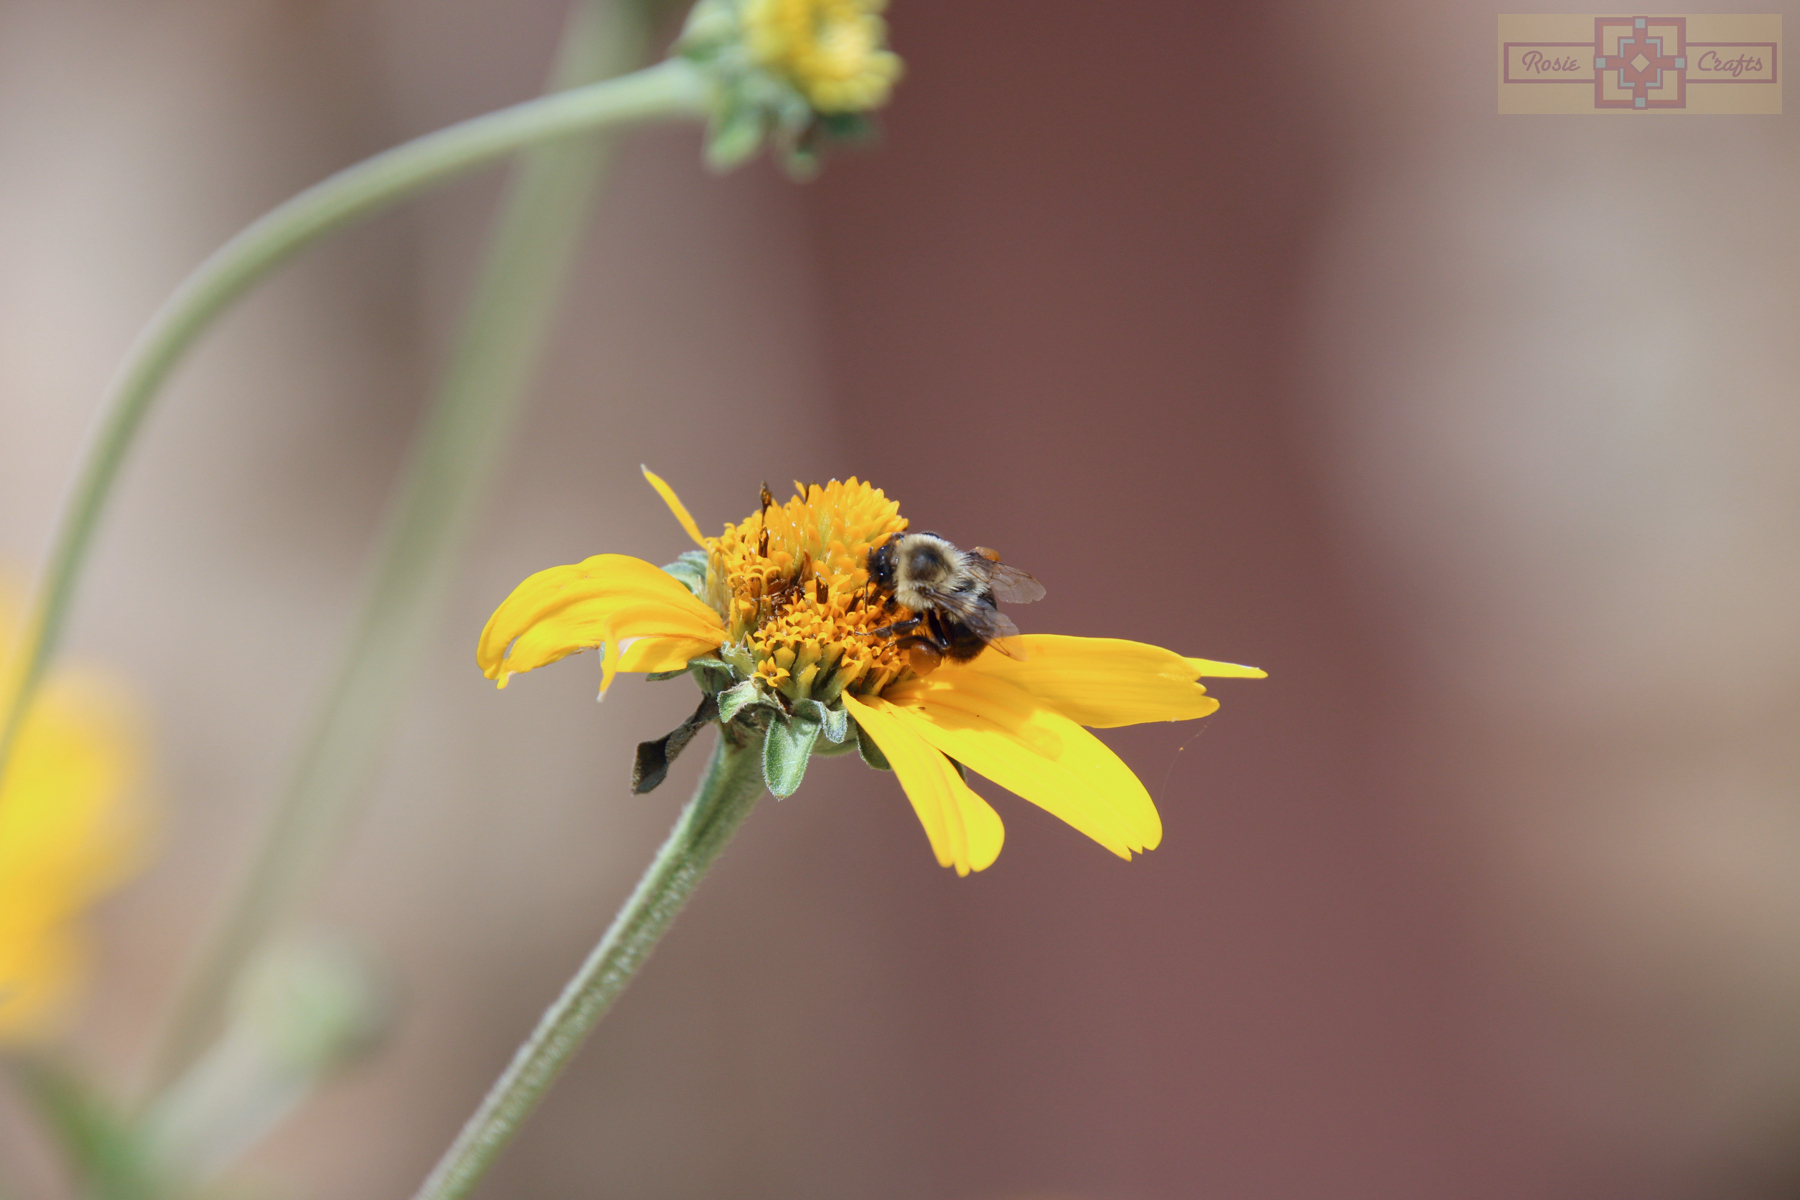 Rosie Crafts Bee Pollinating Flower Photography